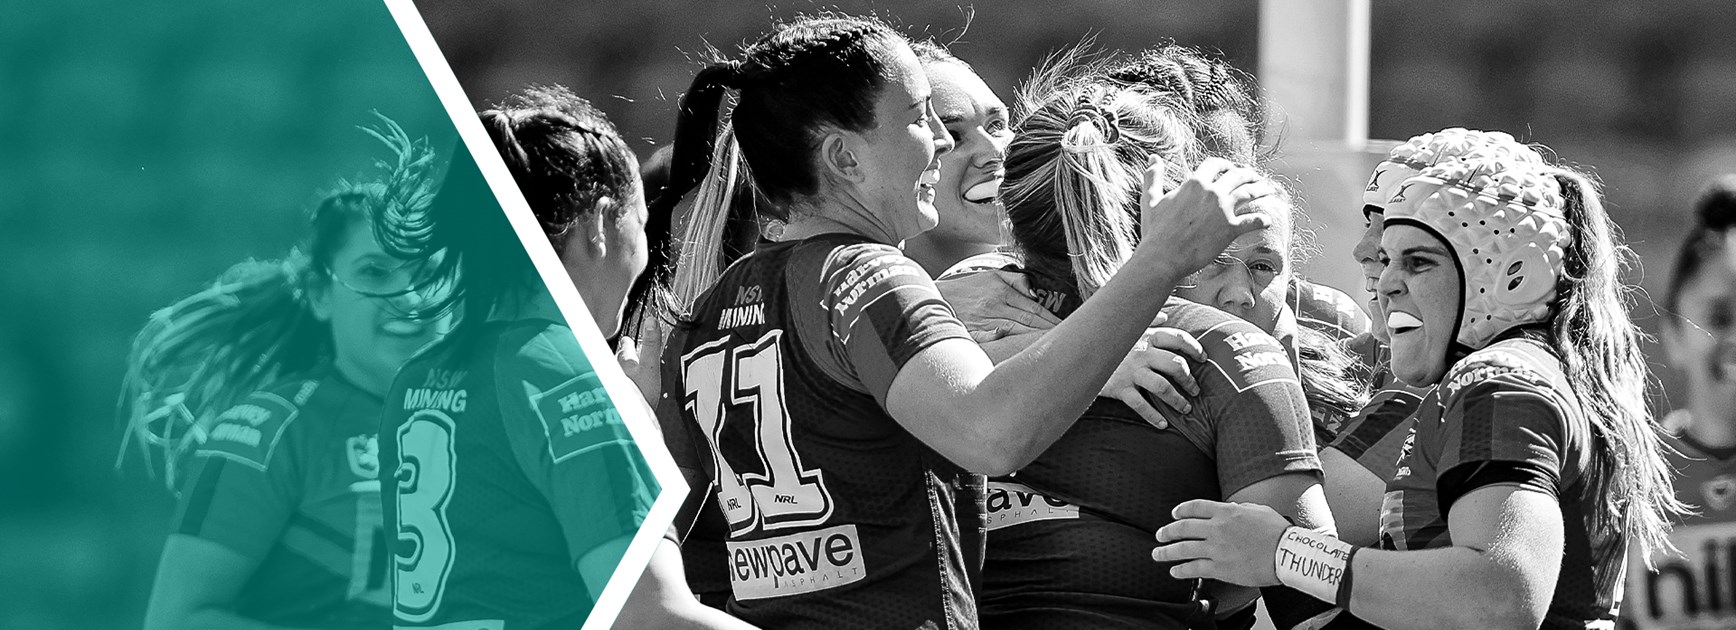 NRLW Late Mail: Round 2 - Taylor ruled out